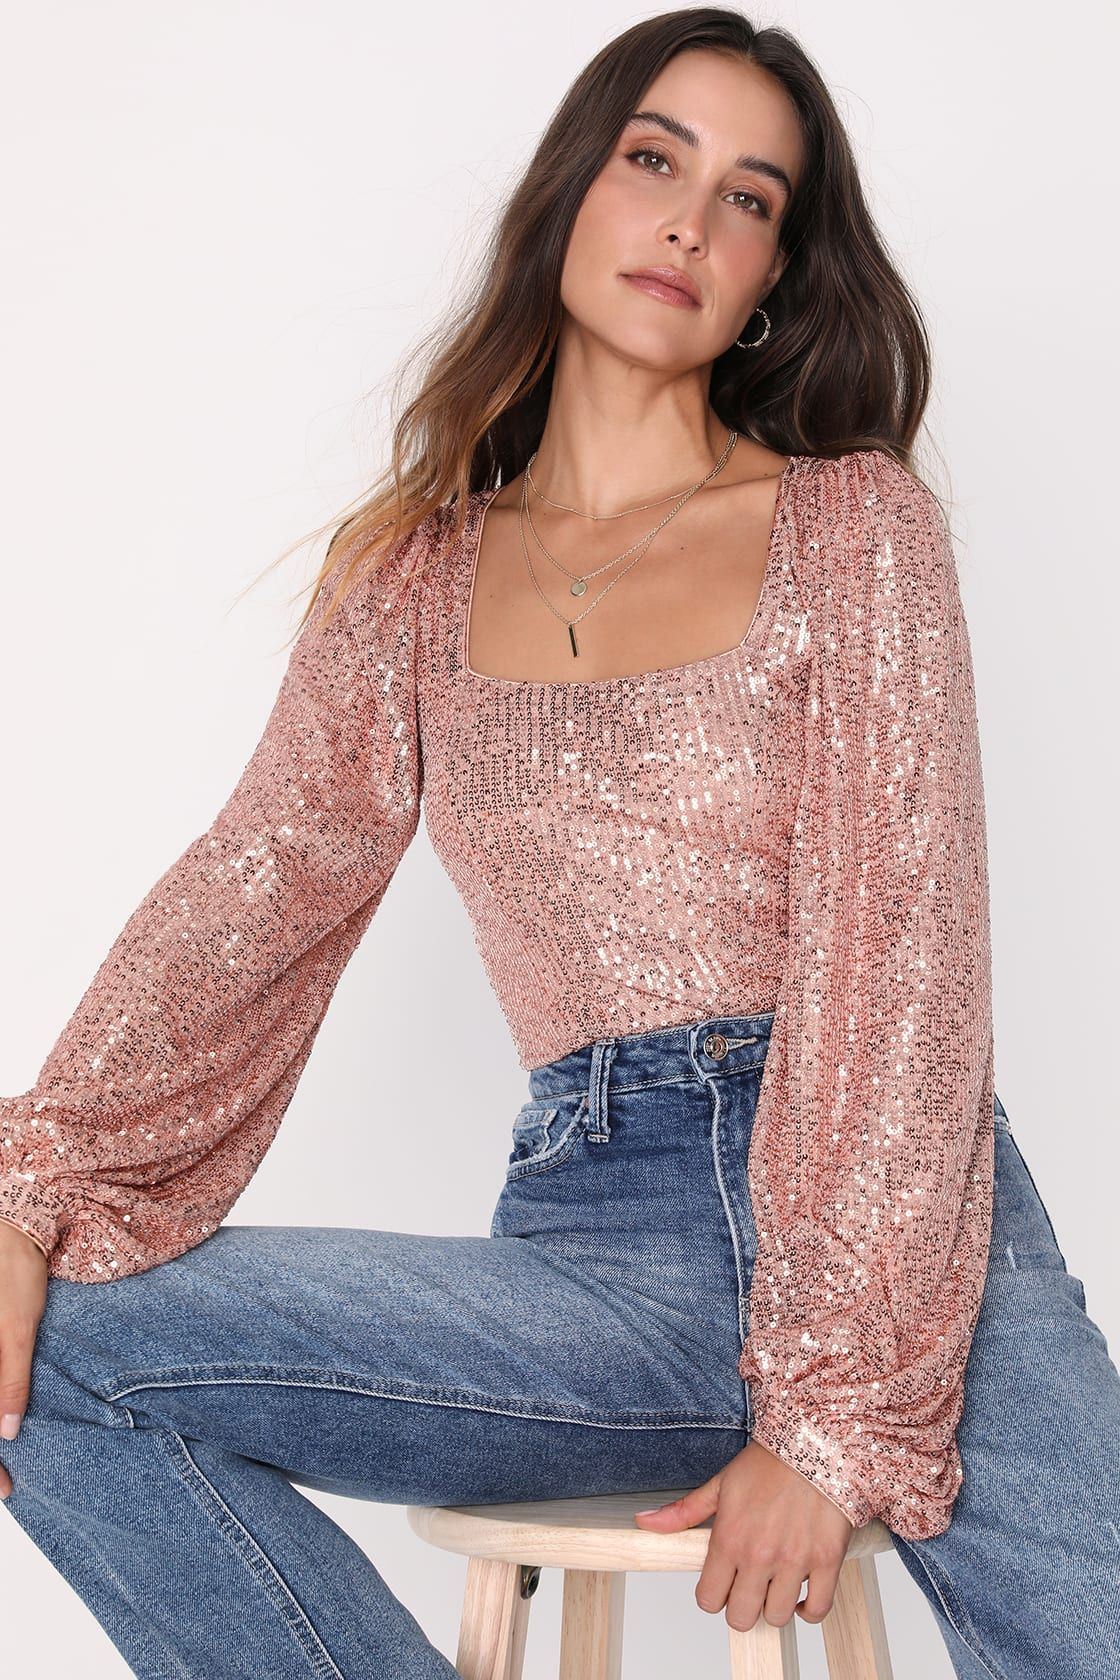 Stay Shining Rose Gold Sequin Square Neck Long Sleeve Top | Lulus (US)